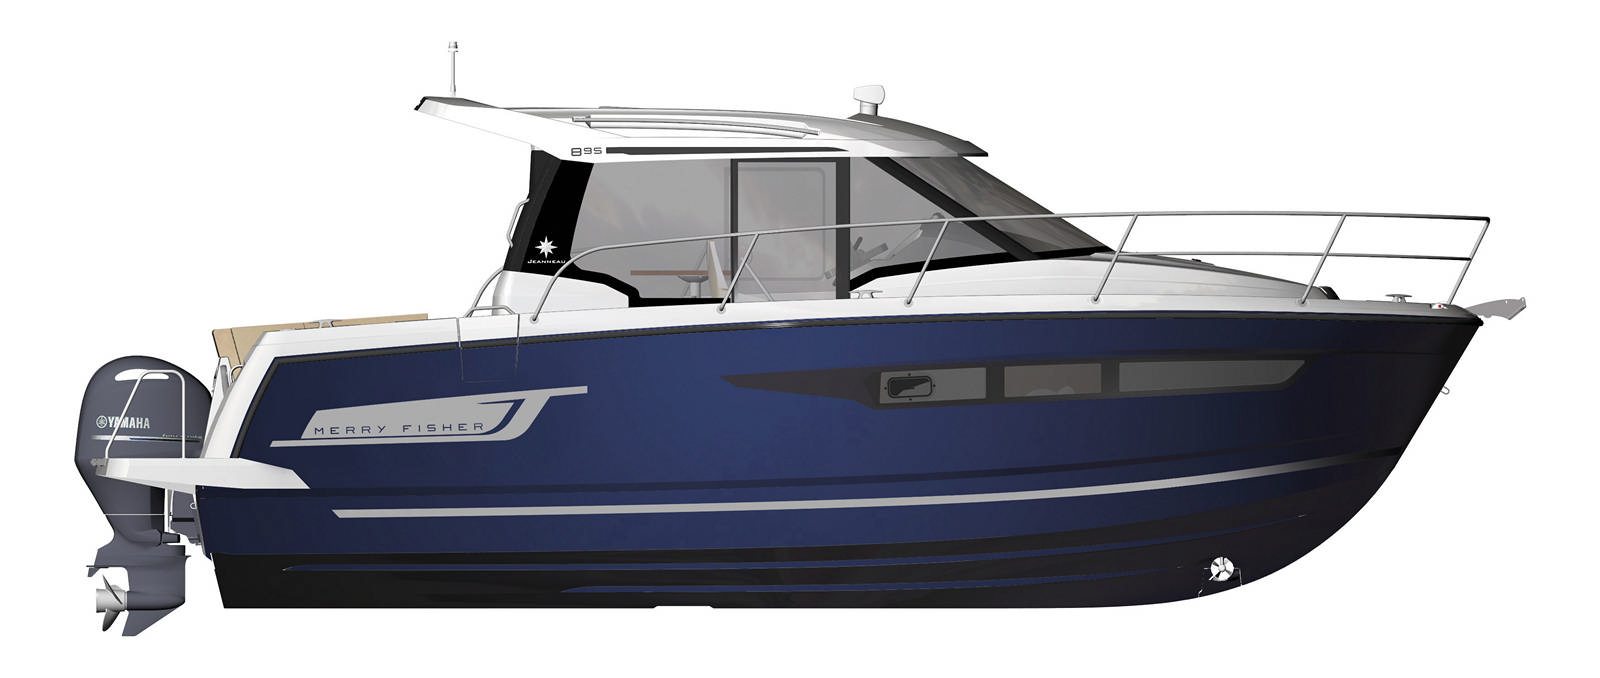 Jeanneau Merry Fisher 895 - Stream Yachts 